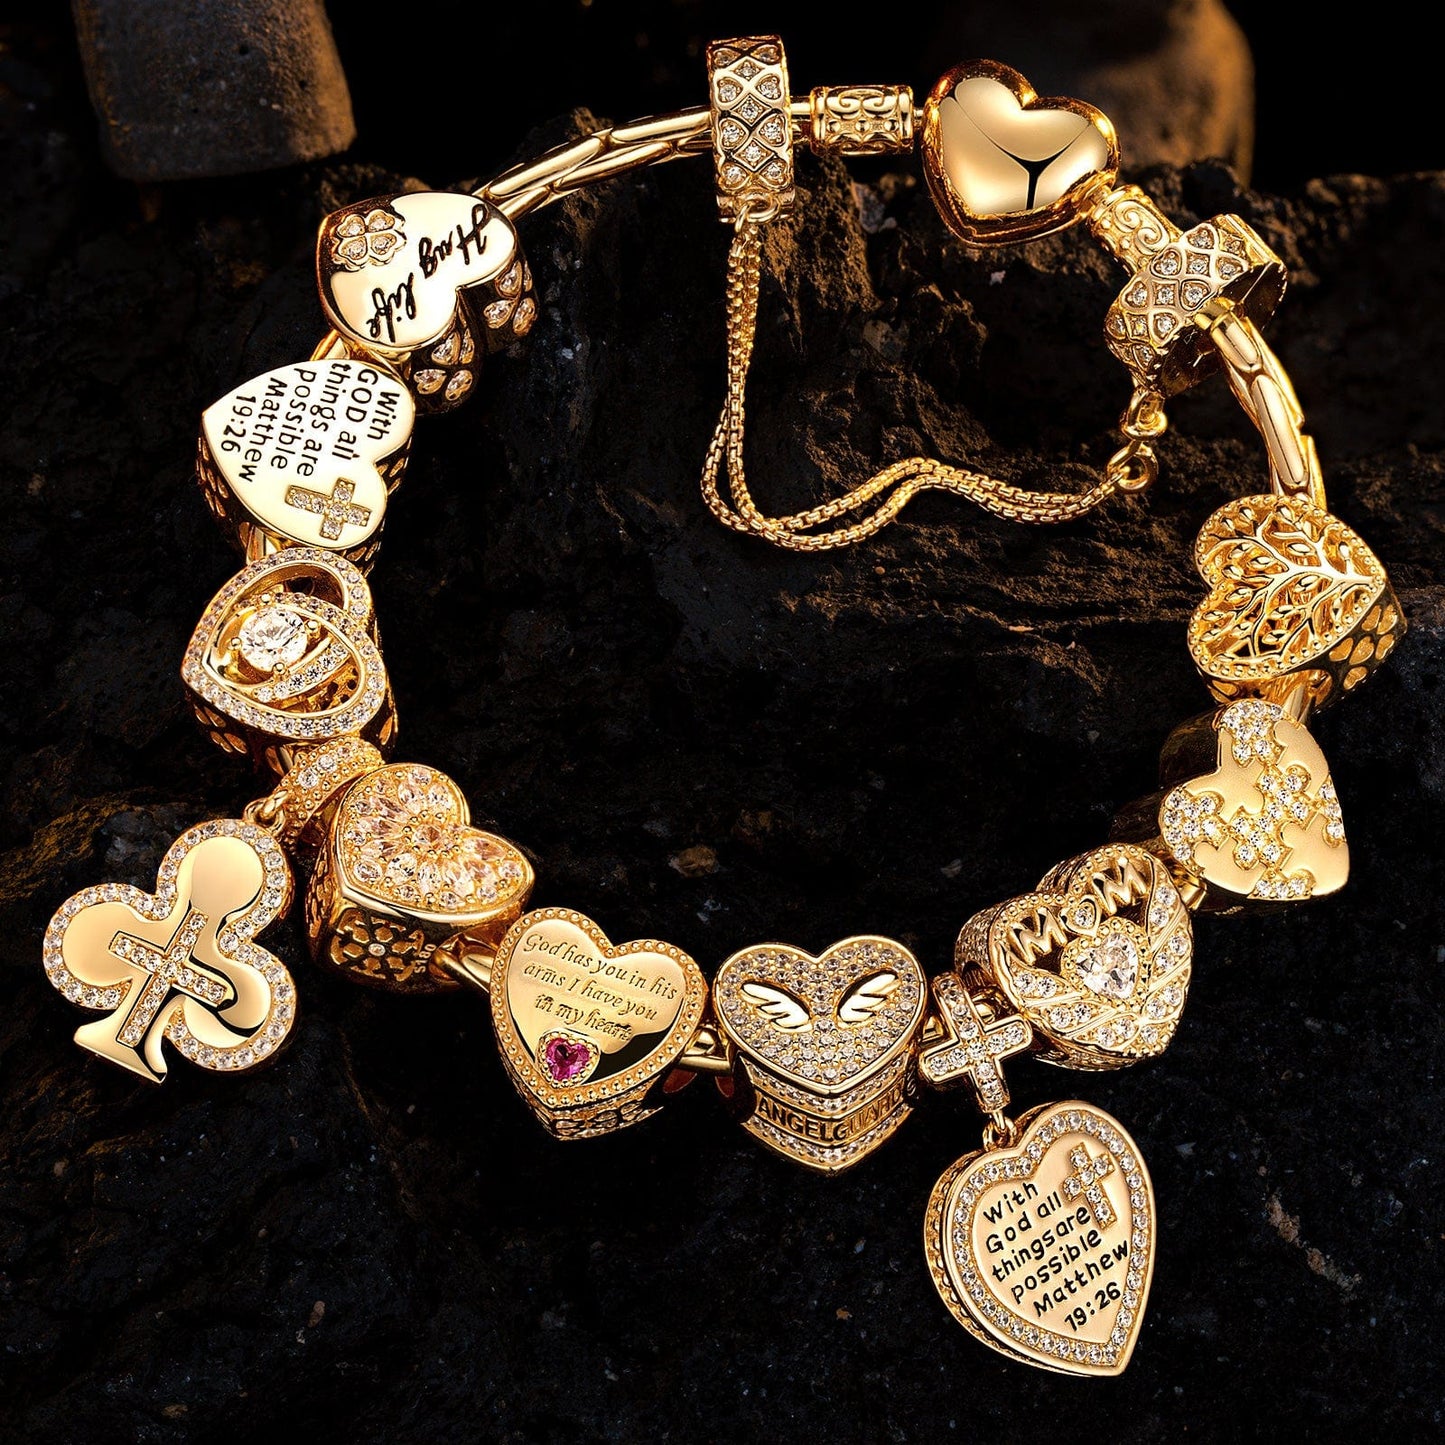 Sterling Silver Eternal Love and Guardian Charms Bracelet Set In 14K Gold Plated